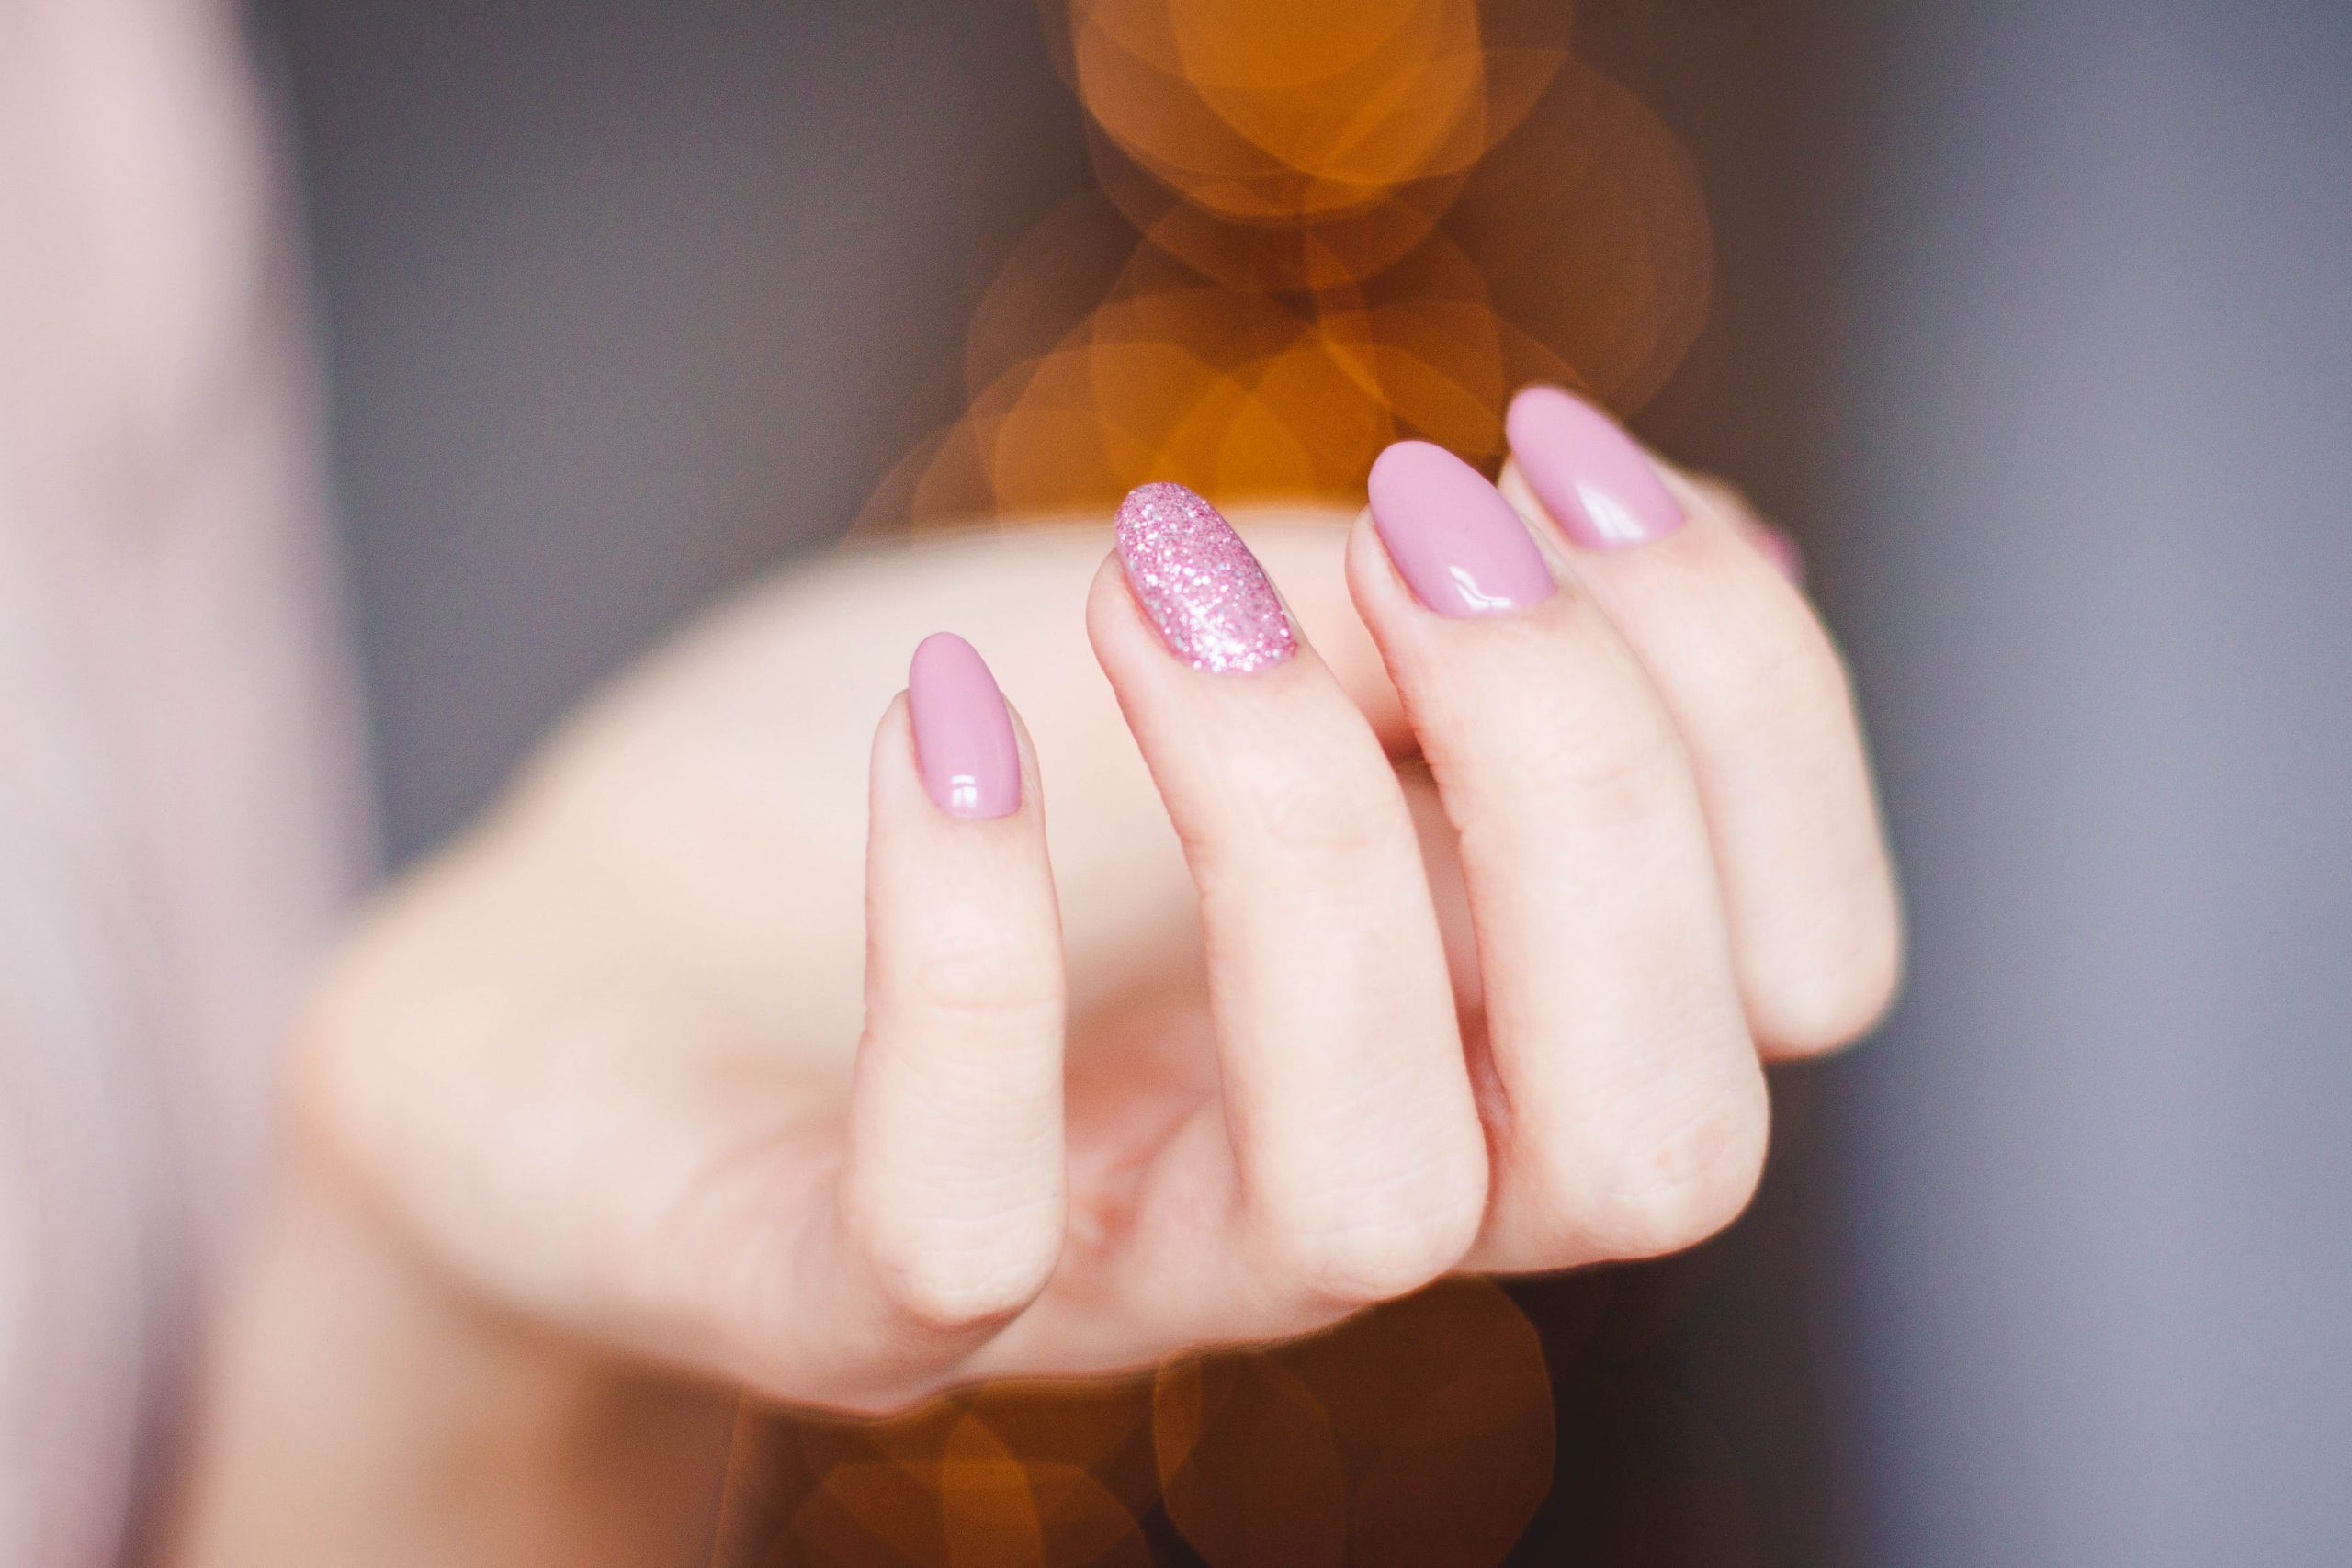 Gel Nails vs Acrylic Nails: Difference Between Gel & Acrylic Nails